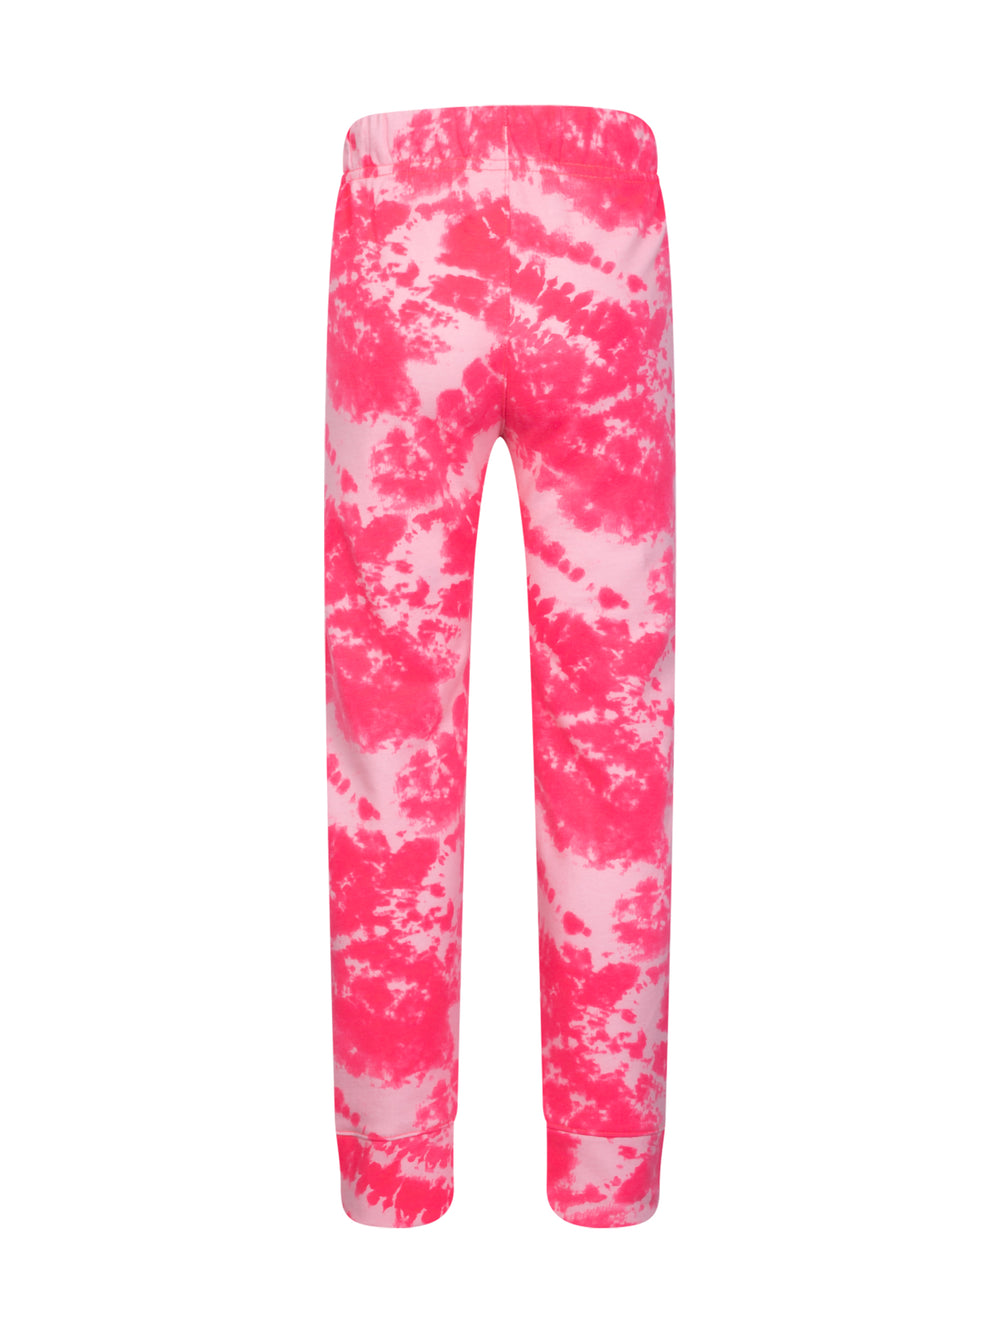 YOUTH GIRLS HURLEY TIE DYE FRENCH TERRY JOGGER - CLEARANCE